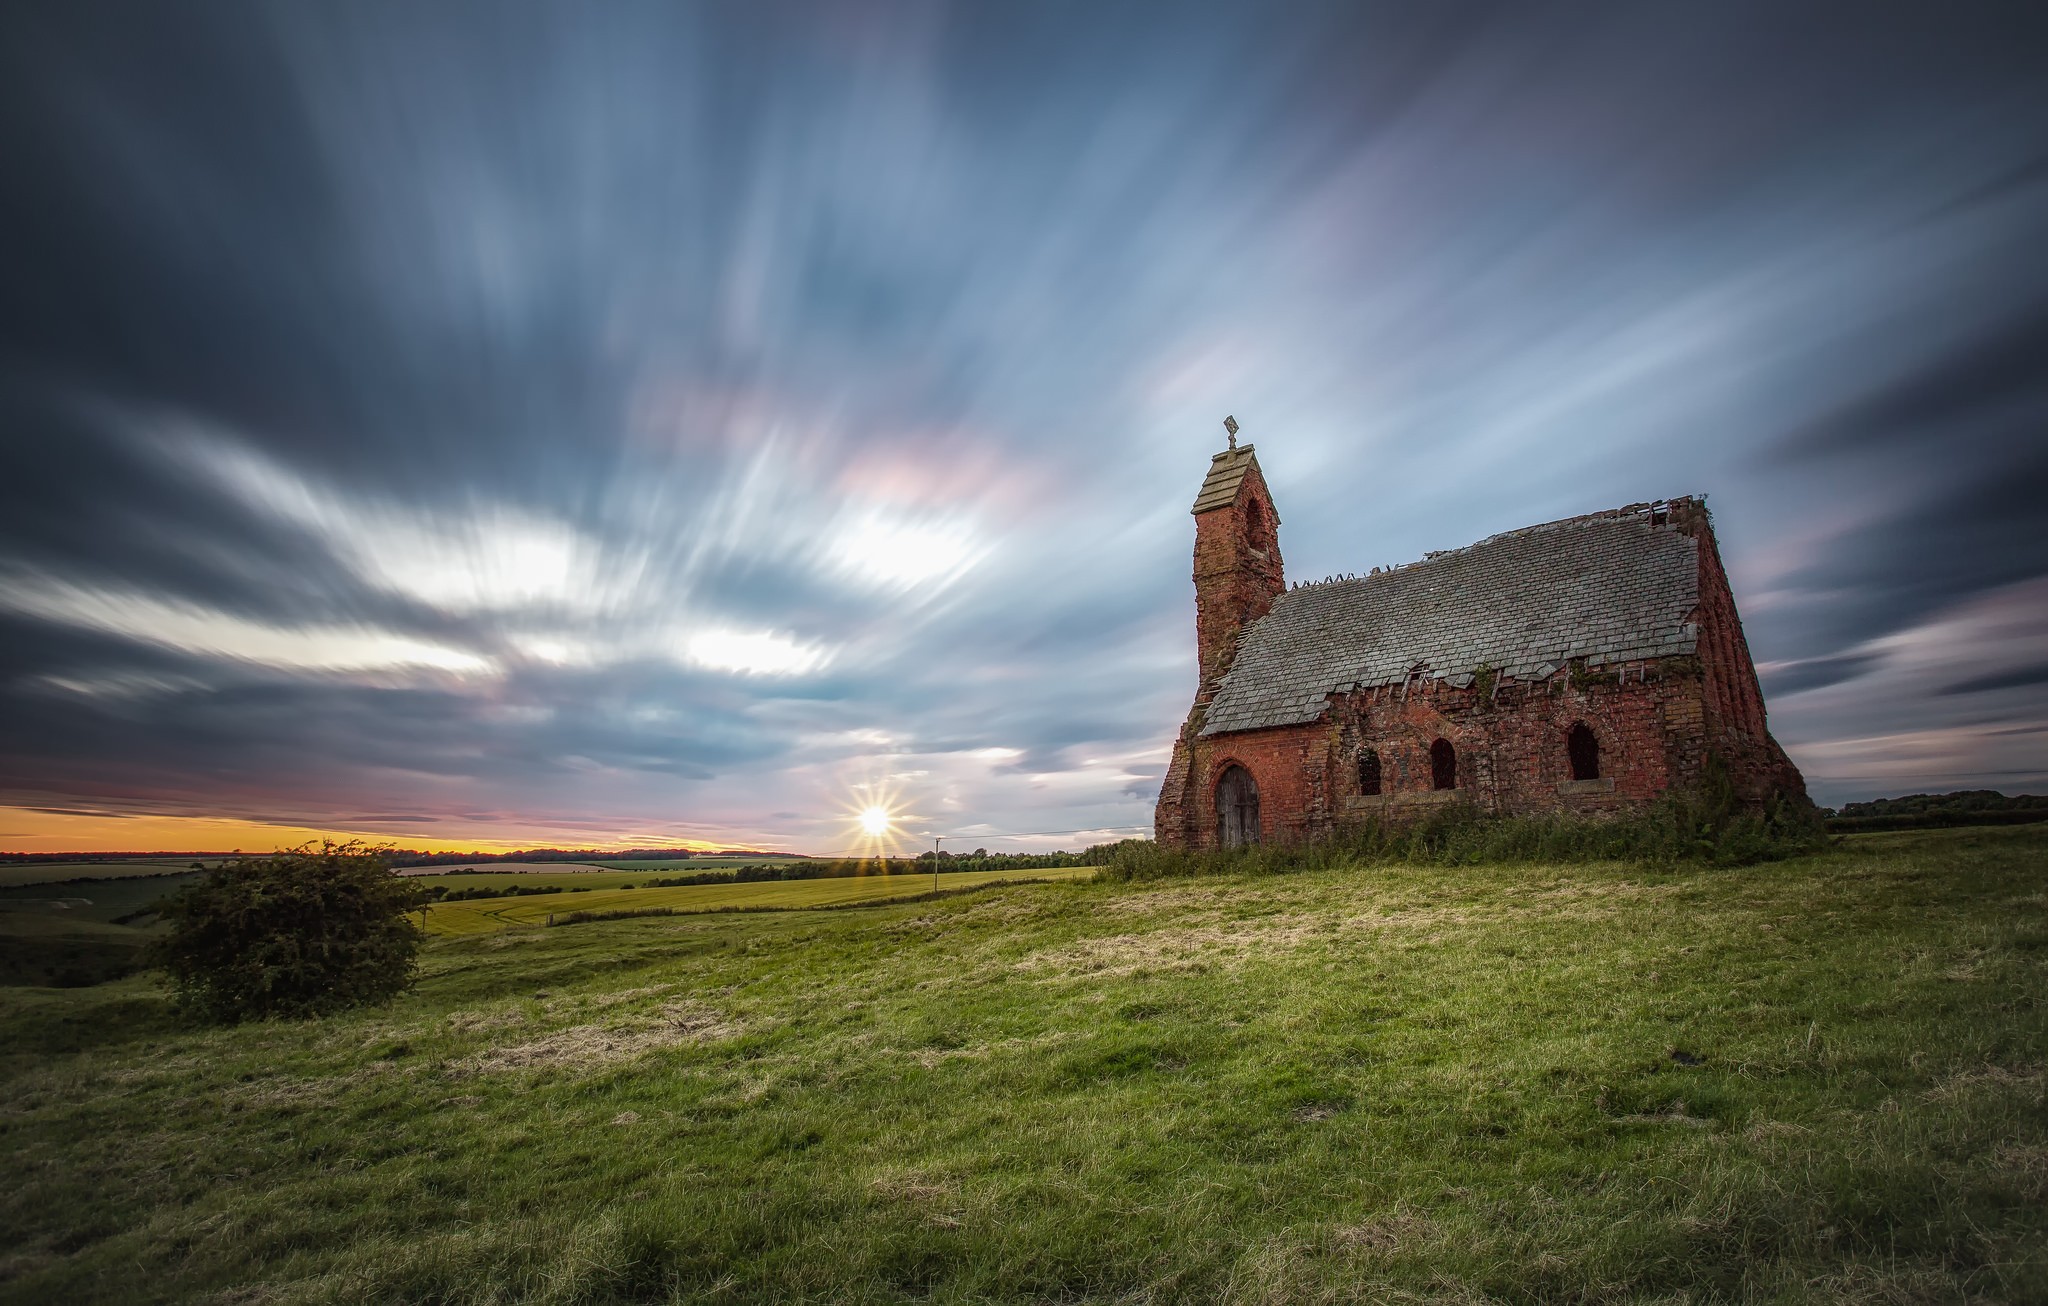 General 2048x1306 sky church outdoors building grass ruins abandoned clouds long exposure landscape field